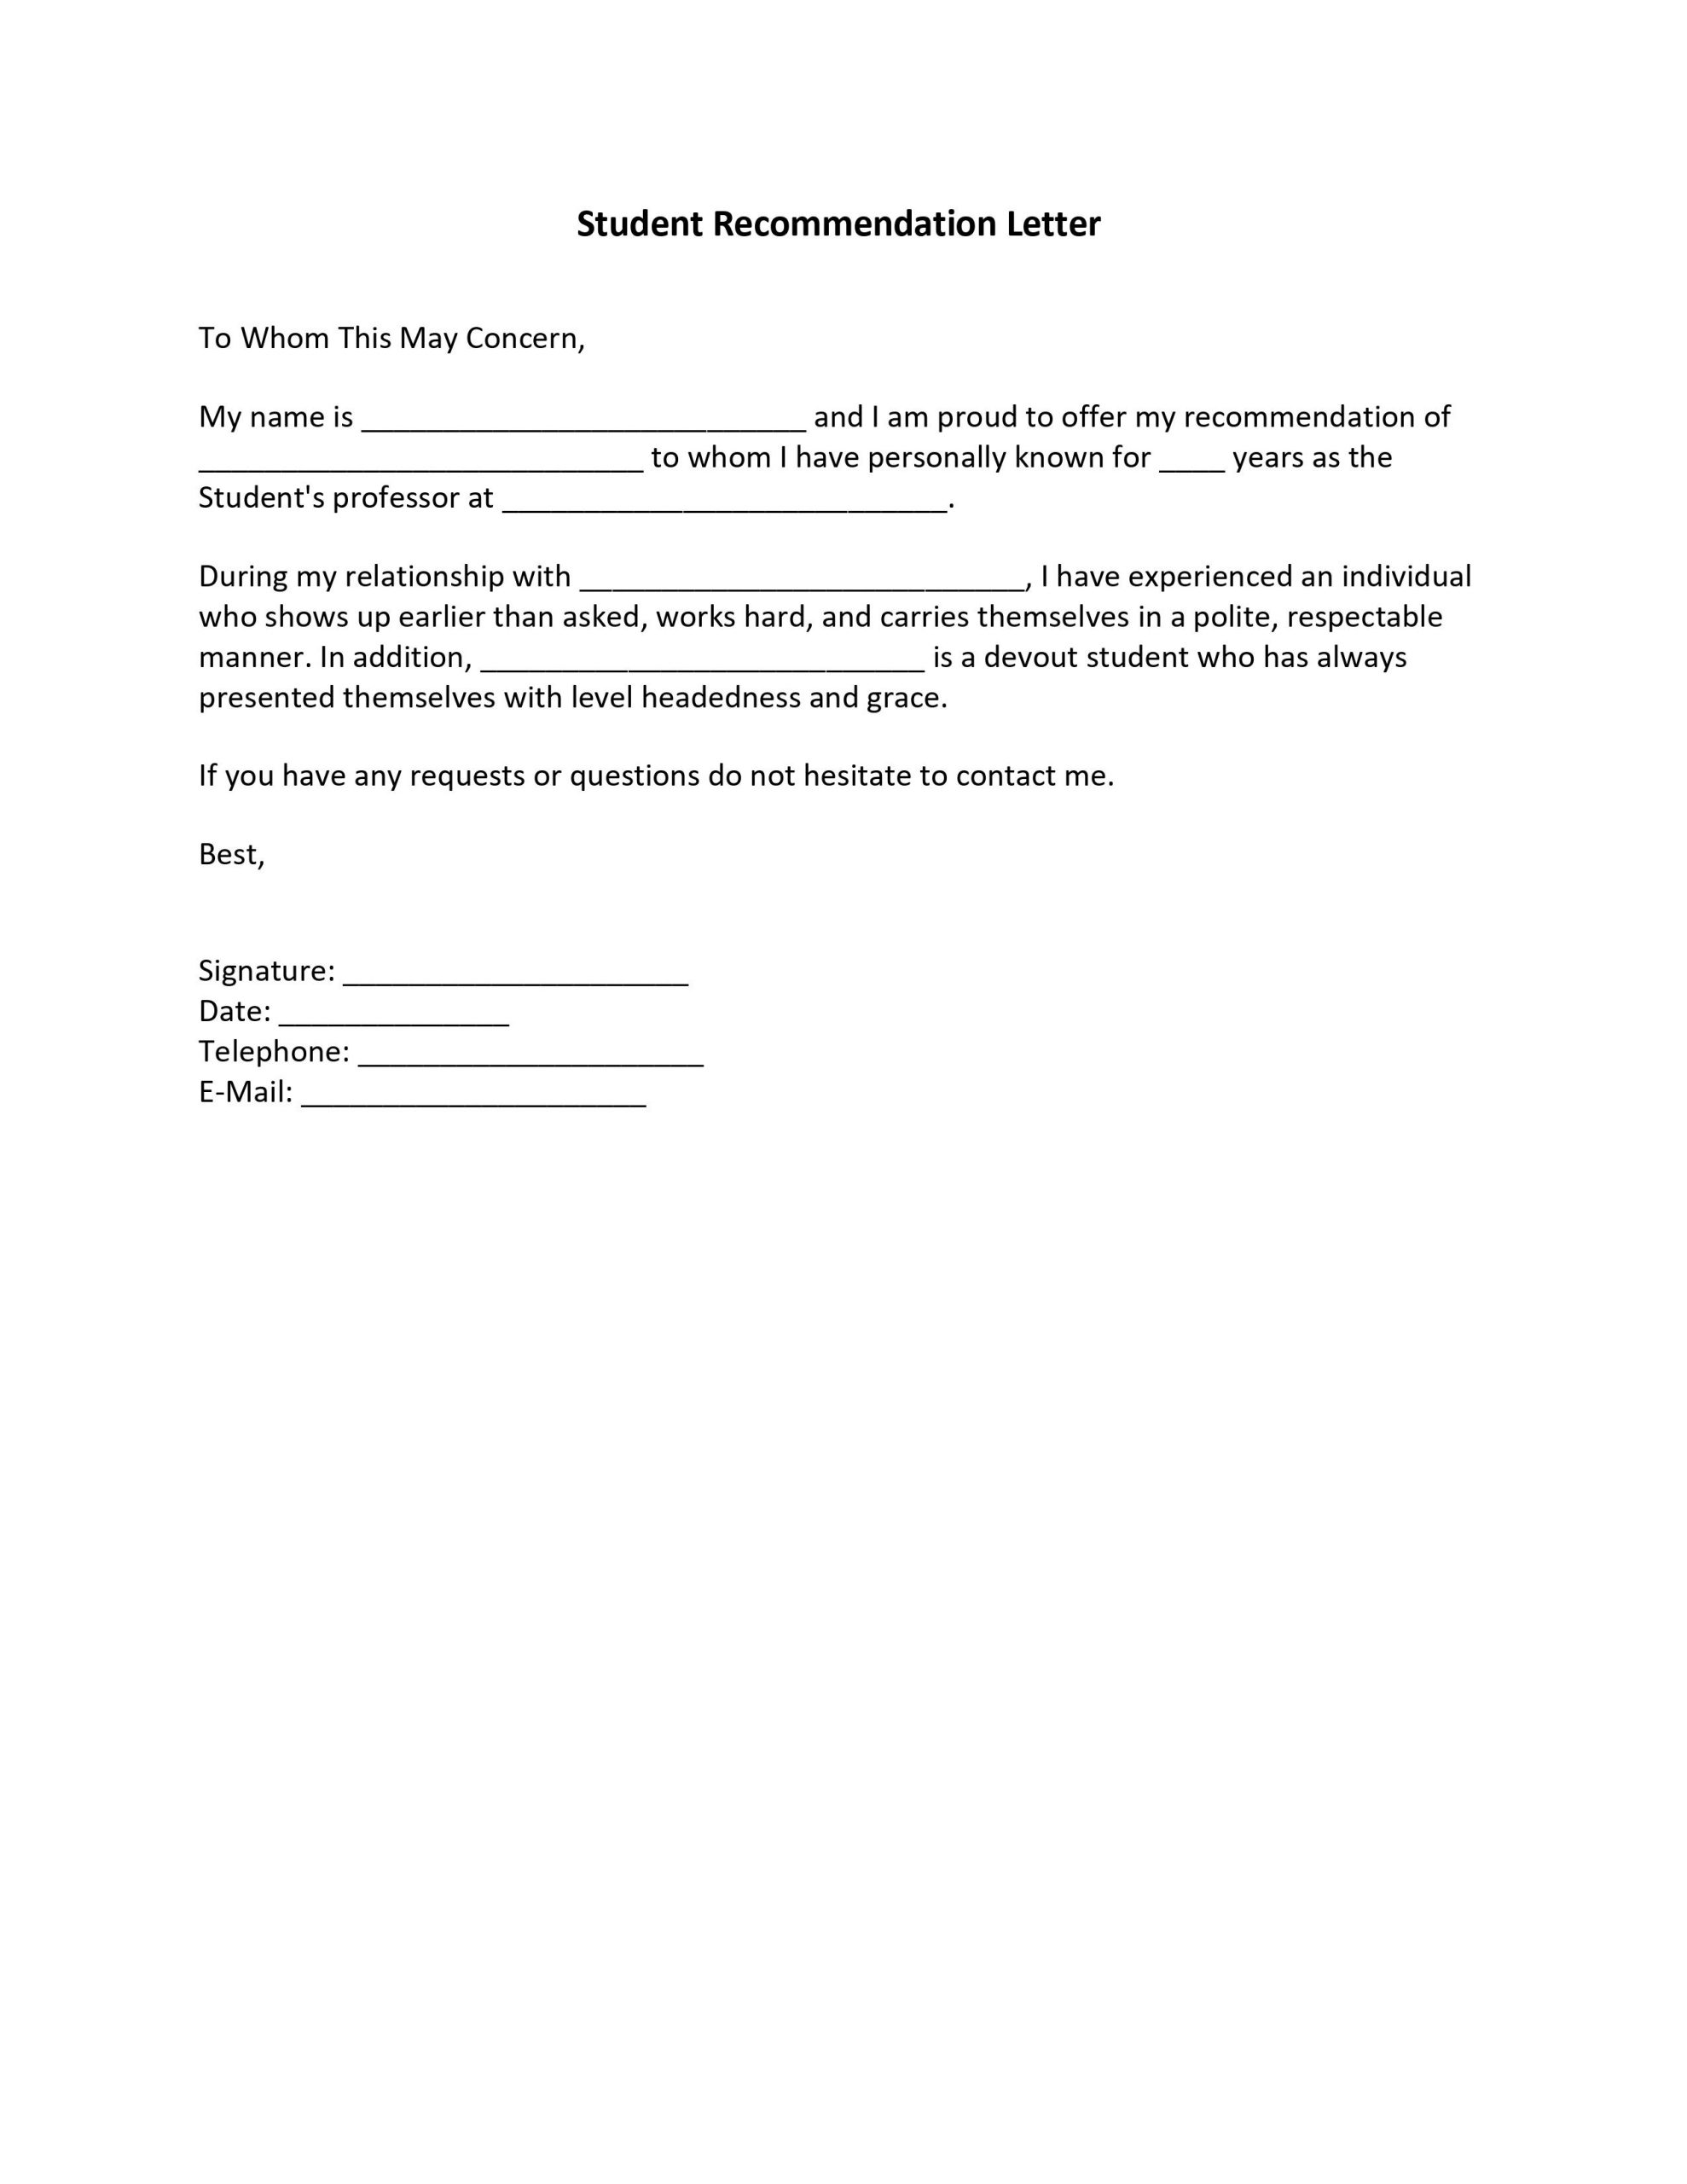 Template For Student Recommendation Letter